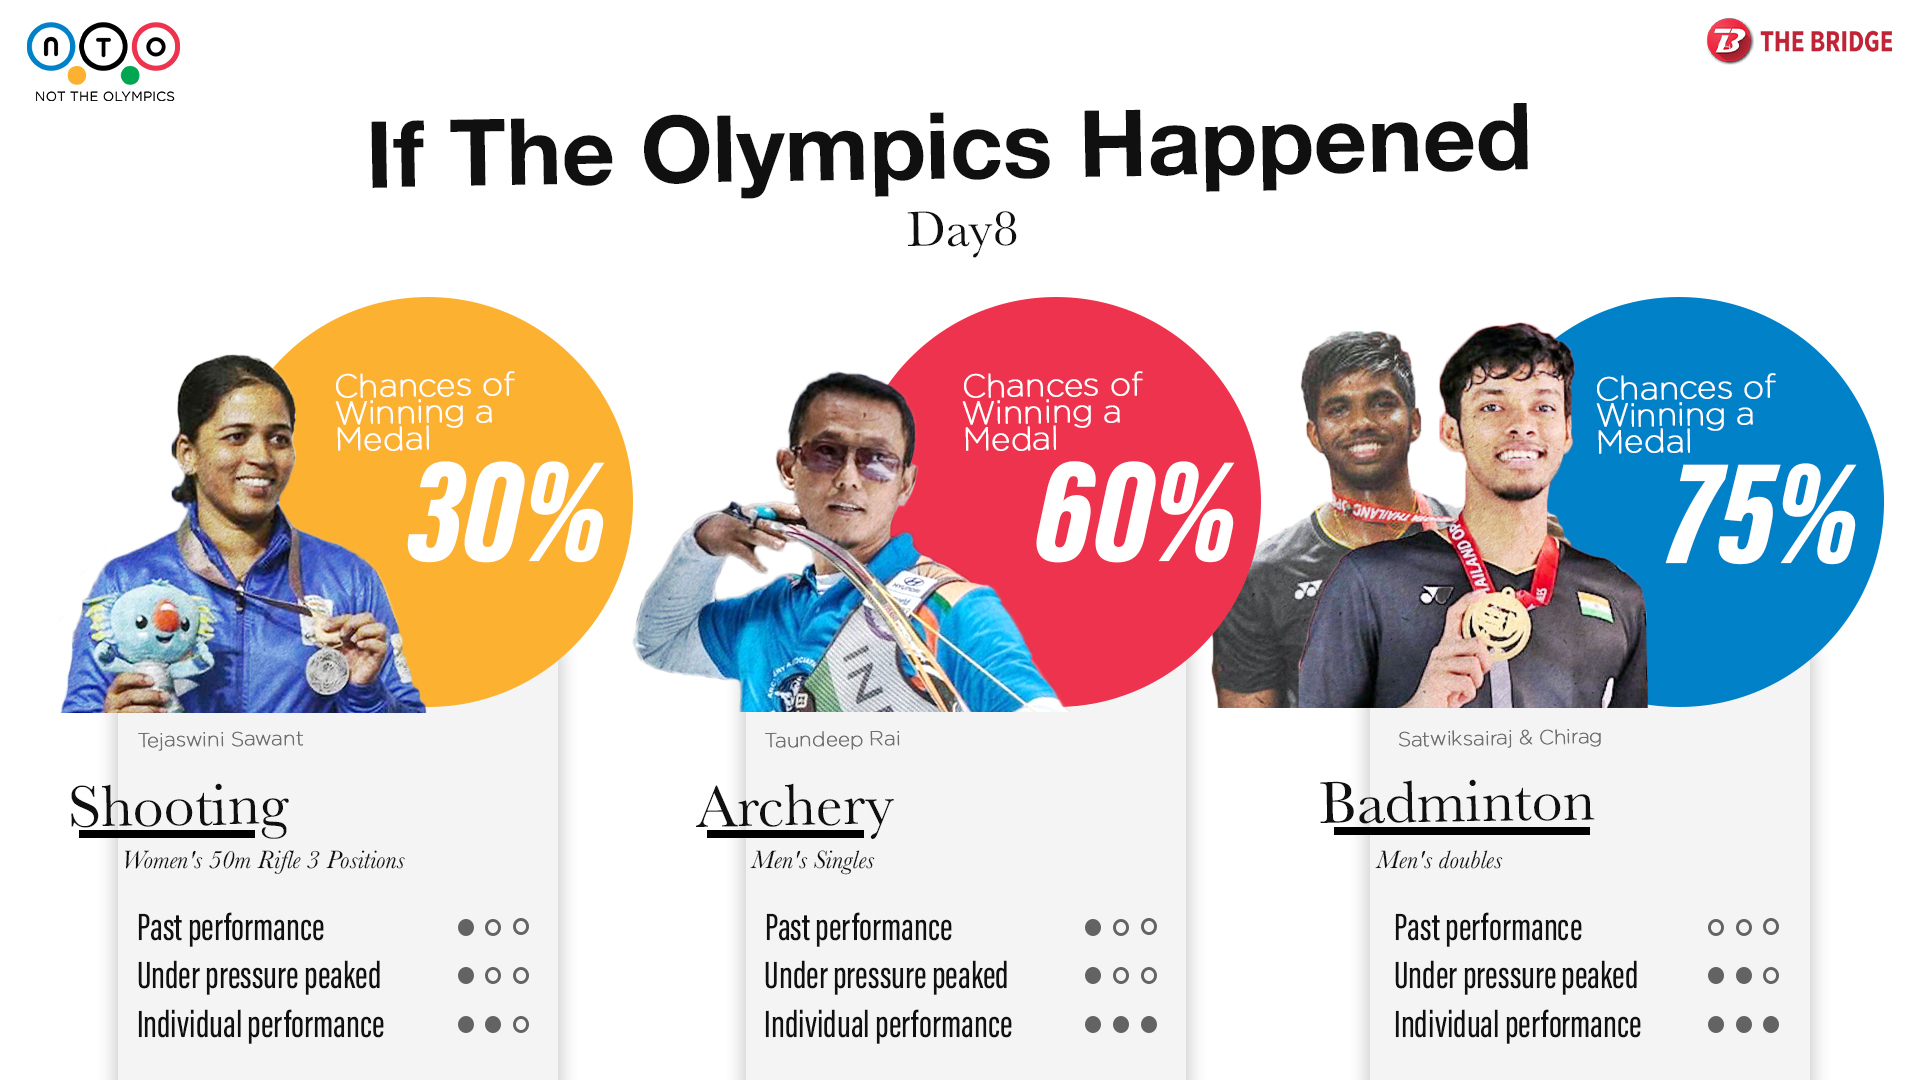 If the Olympics happened - Chances of winning medals by Indians